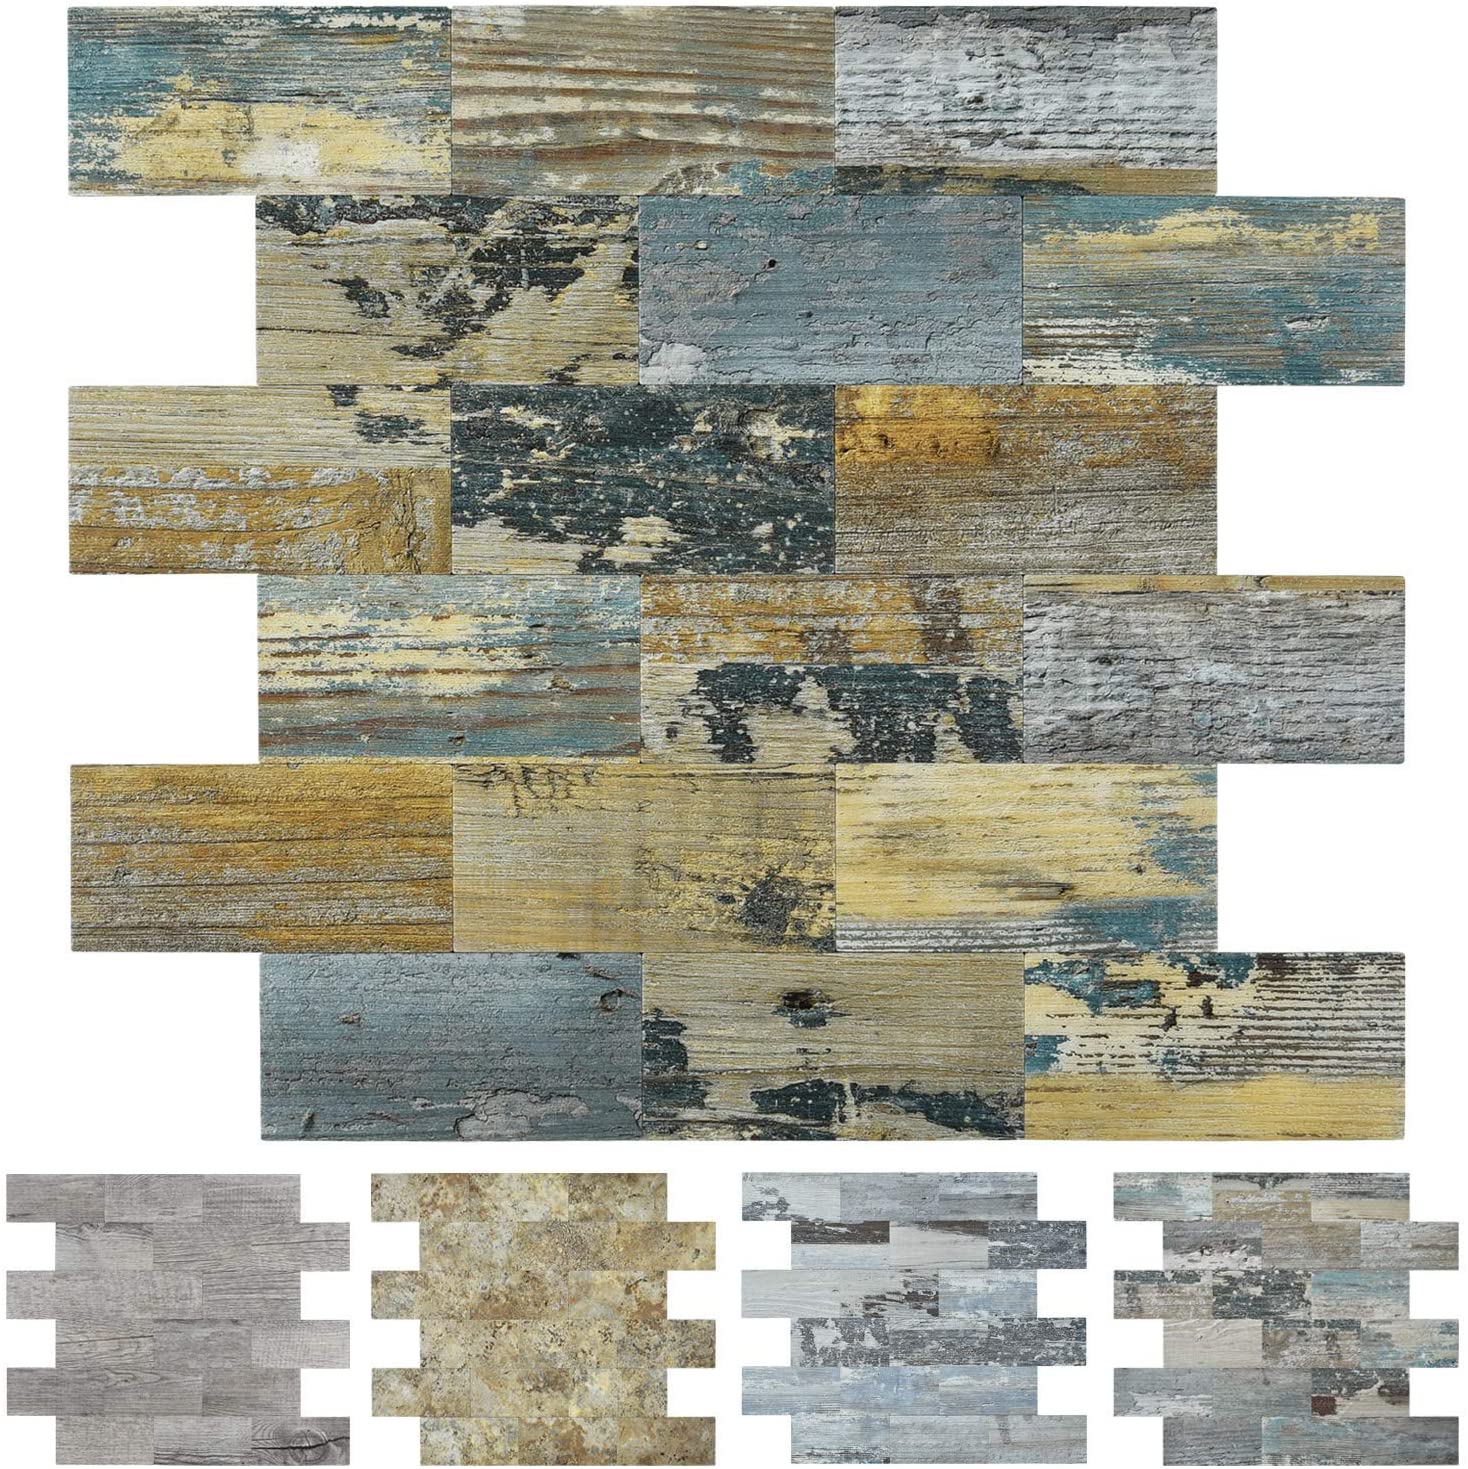 A16513 -  10 Sheets Peel and Stick Distressed Rustic Wood Panel, 13.5x11.4inches Each Tile